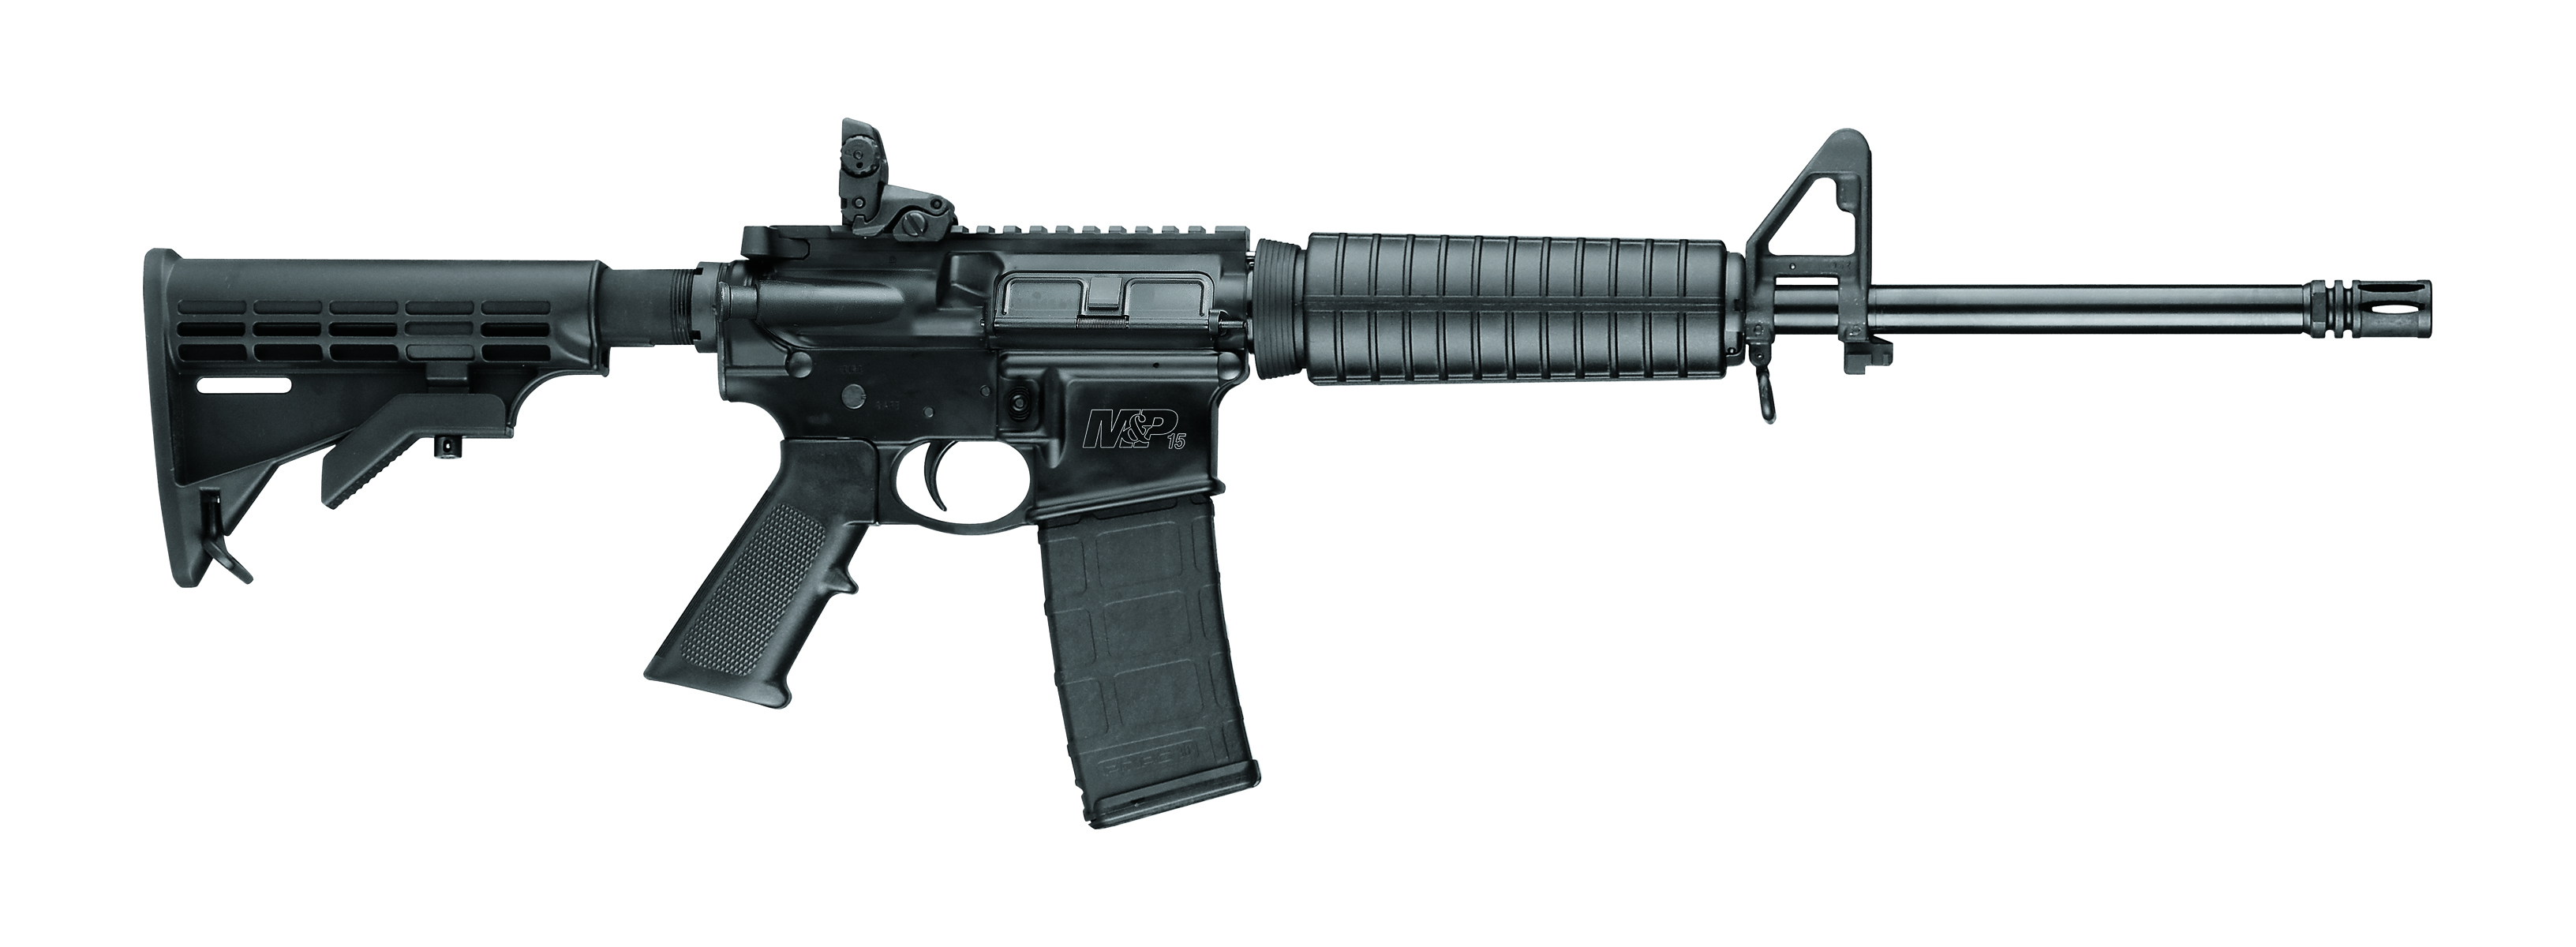 Smith & Wesson M&P15 Sport II 5.56 Rifle 10202_R